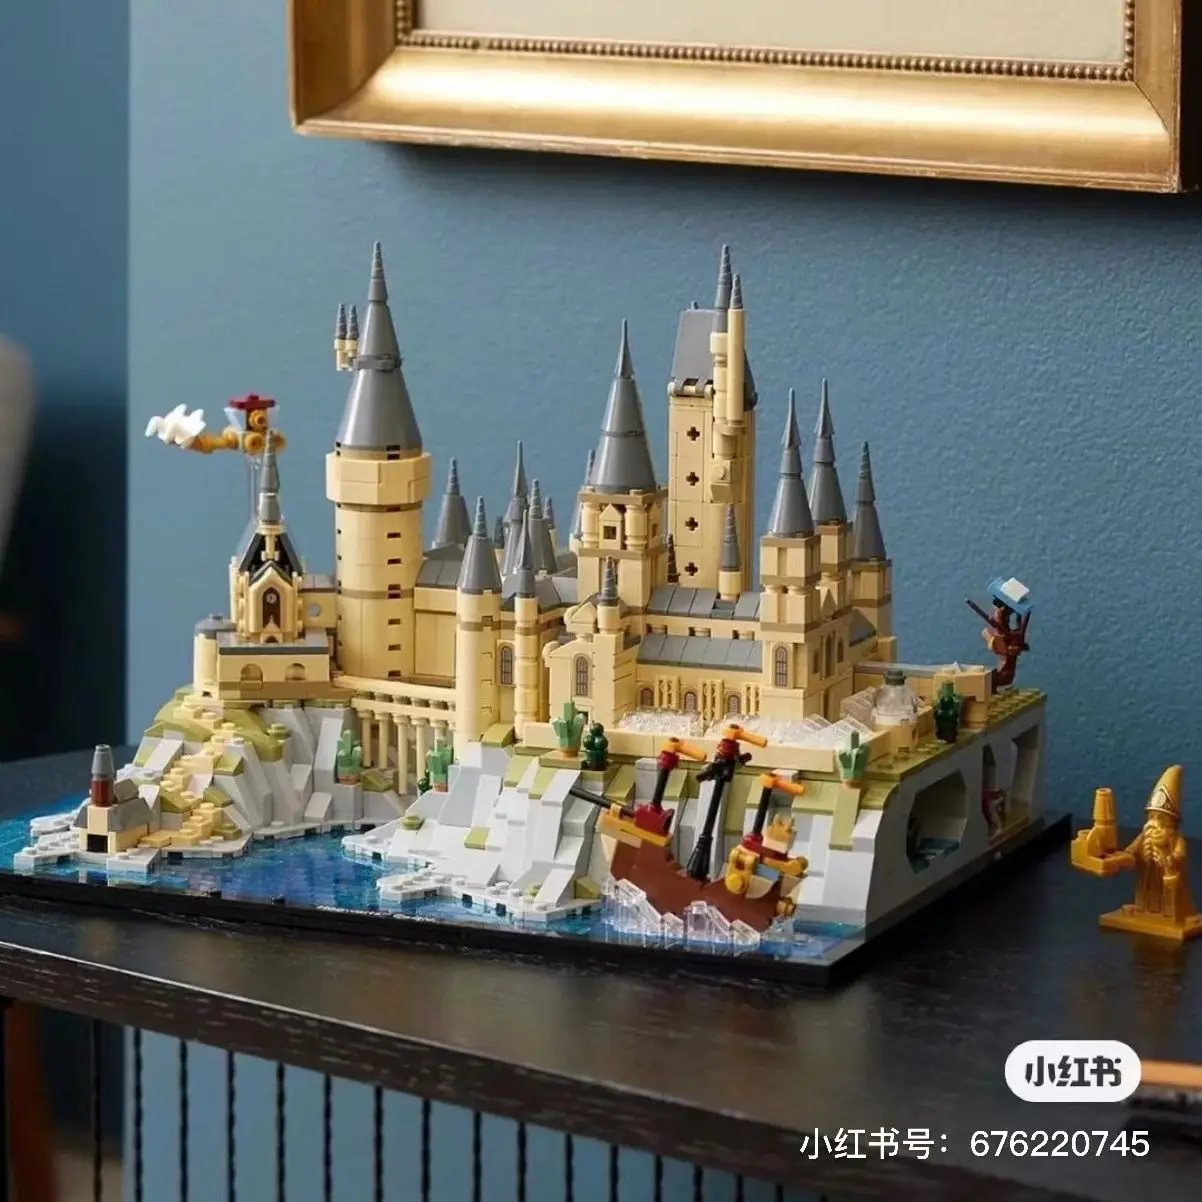 

2023 NEW IN STOCK 76419 Castle and Grounds Classic Building Blocks Architecture Model Bricks Toys for Kids Adults Birthday Gift